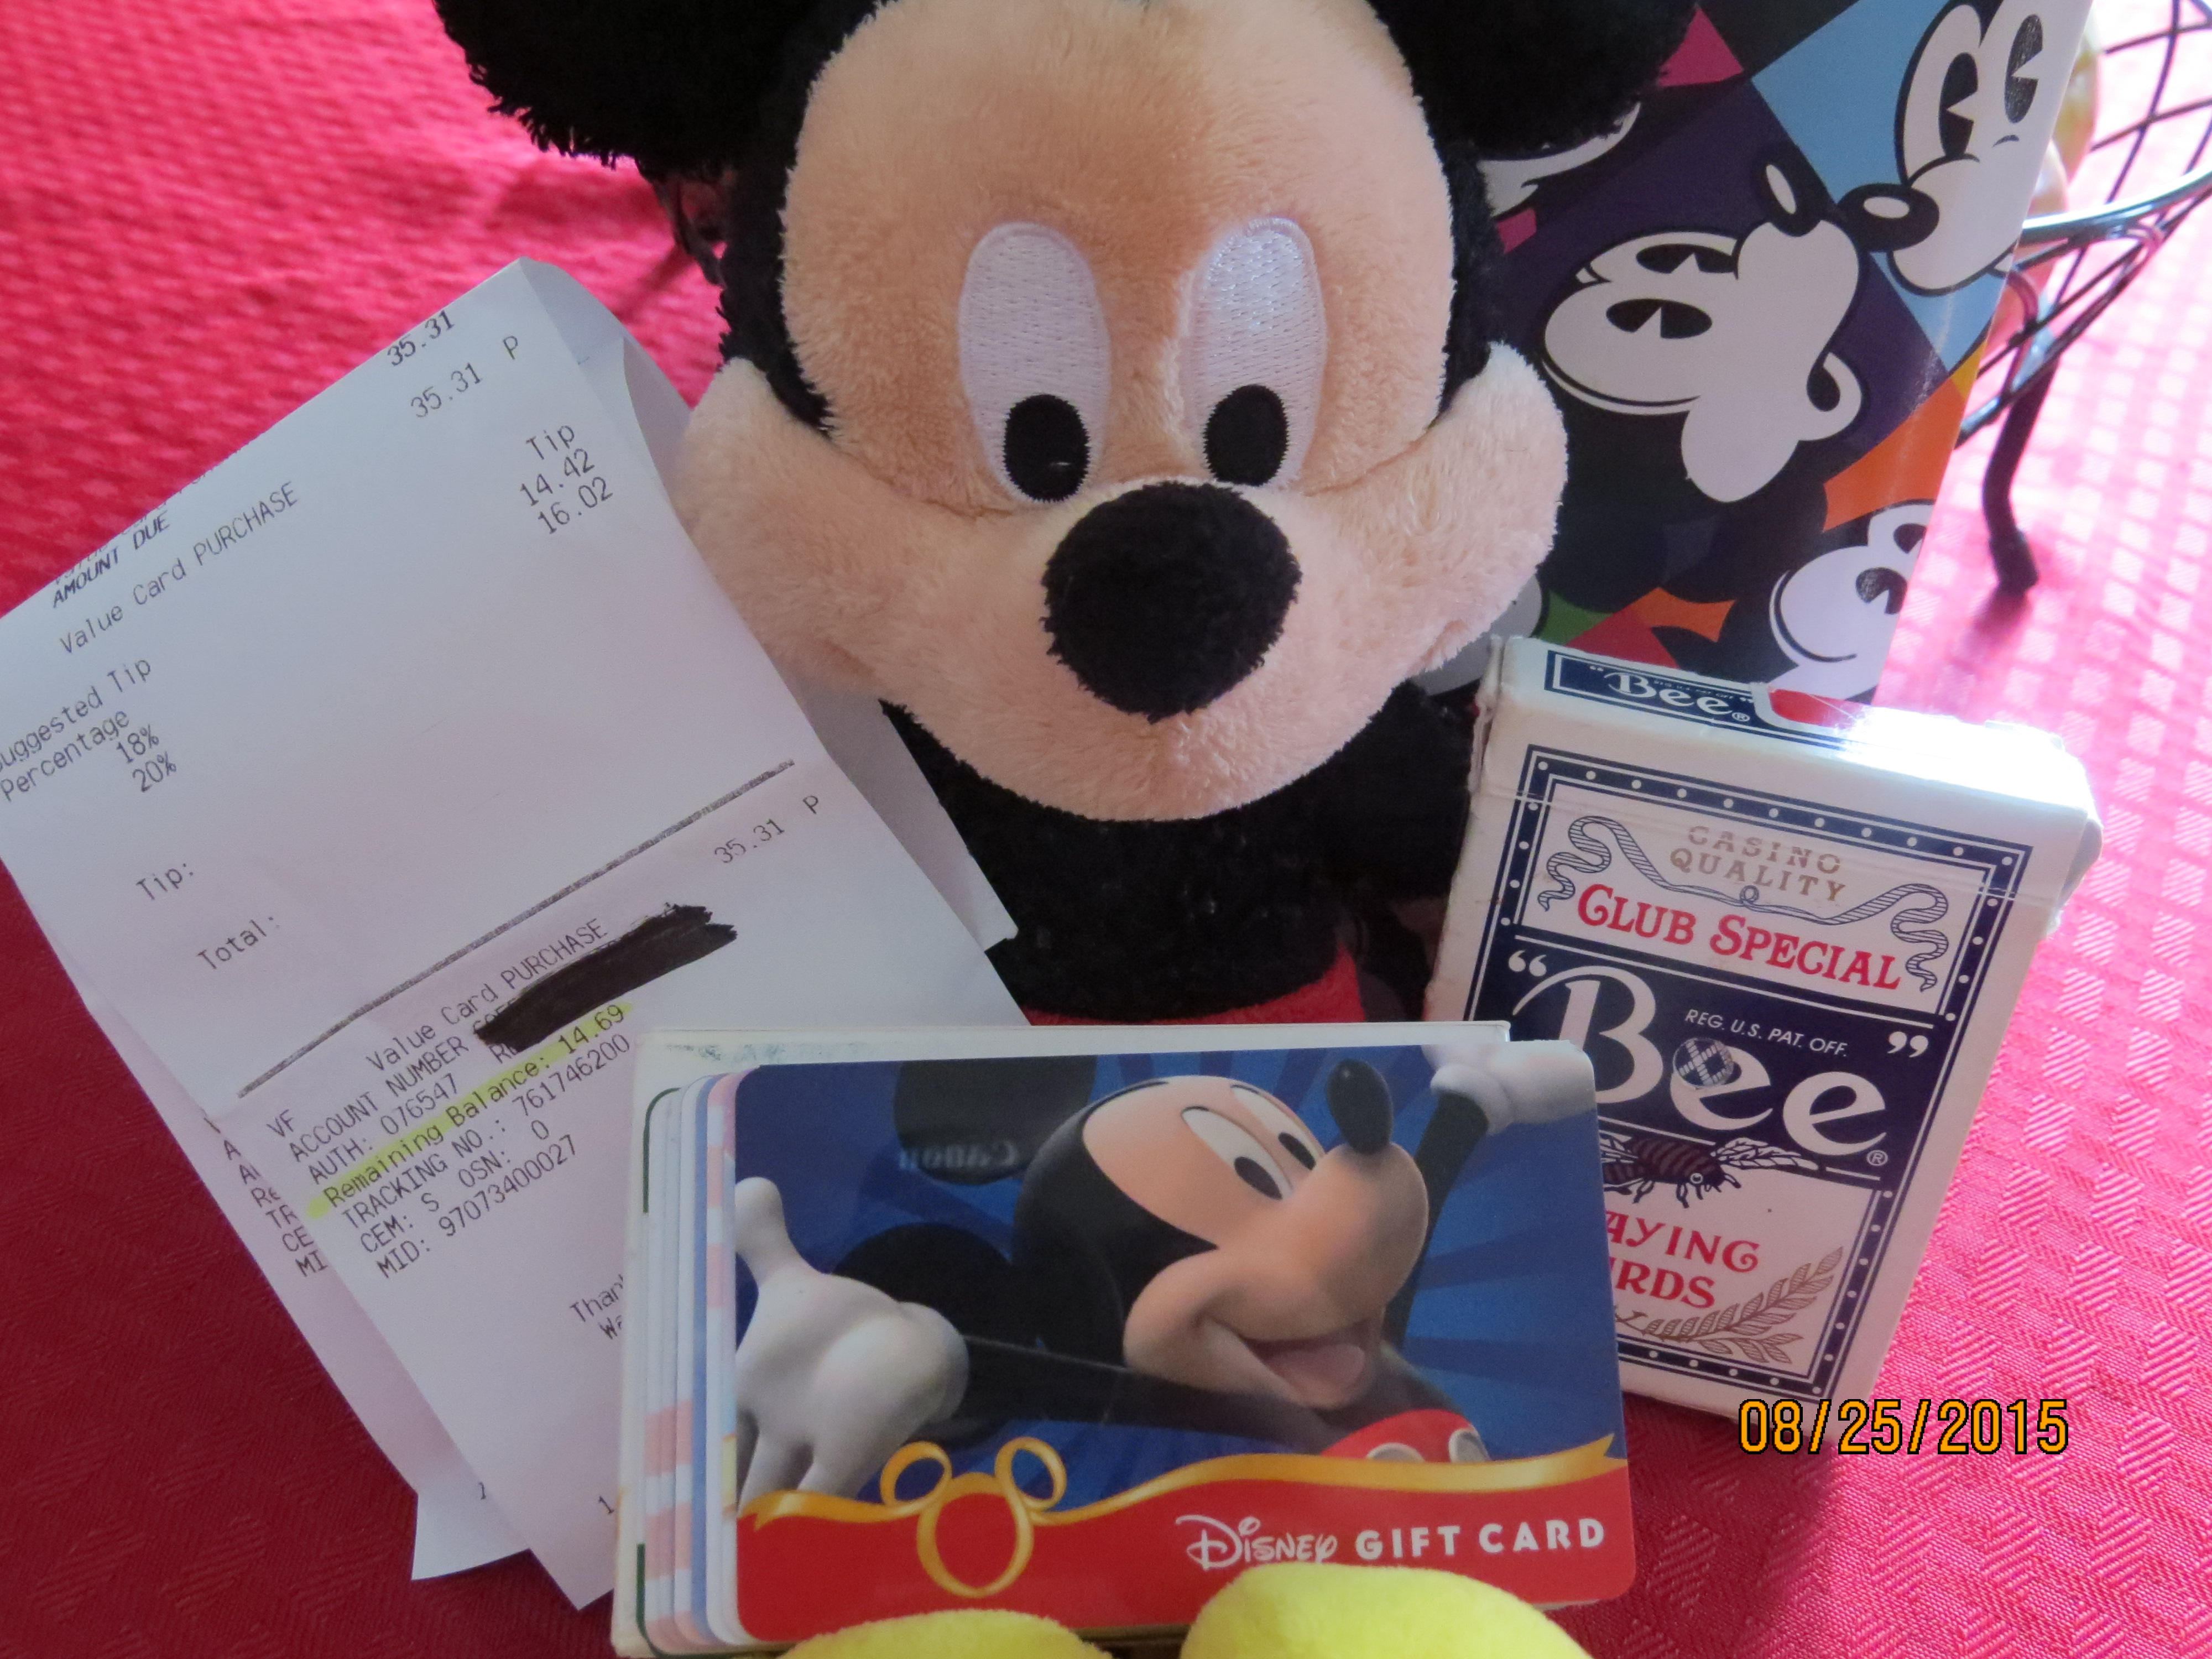 A Better Way to Manage Your Disney Gift Cards